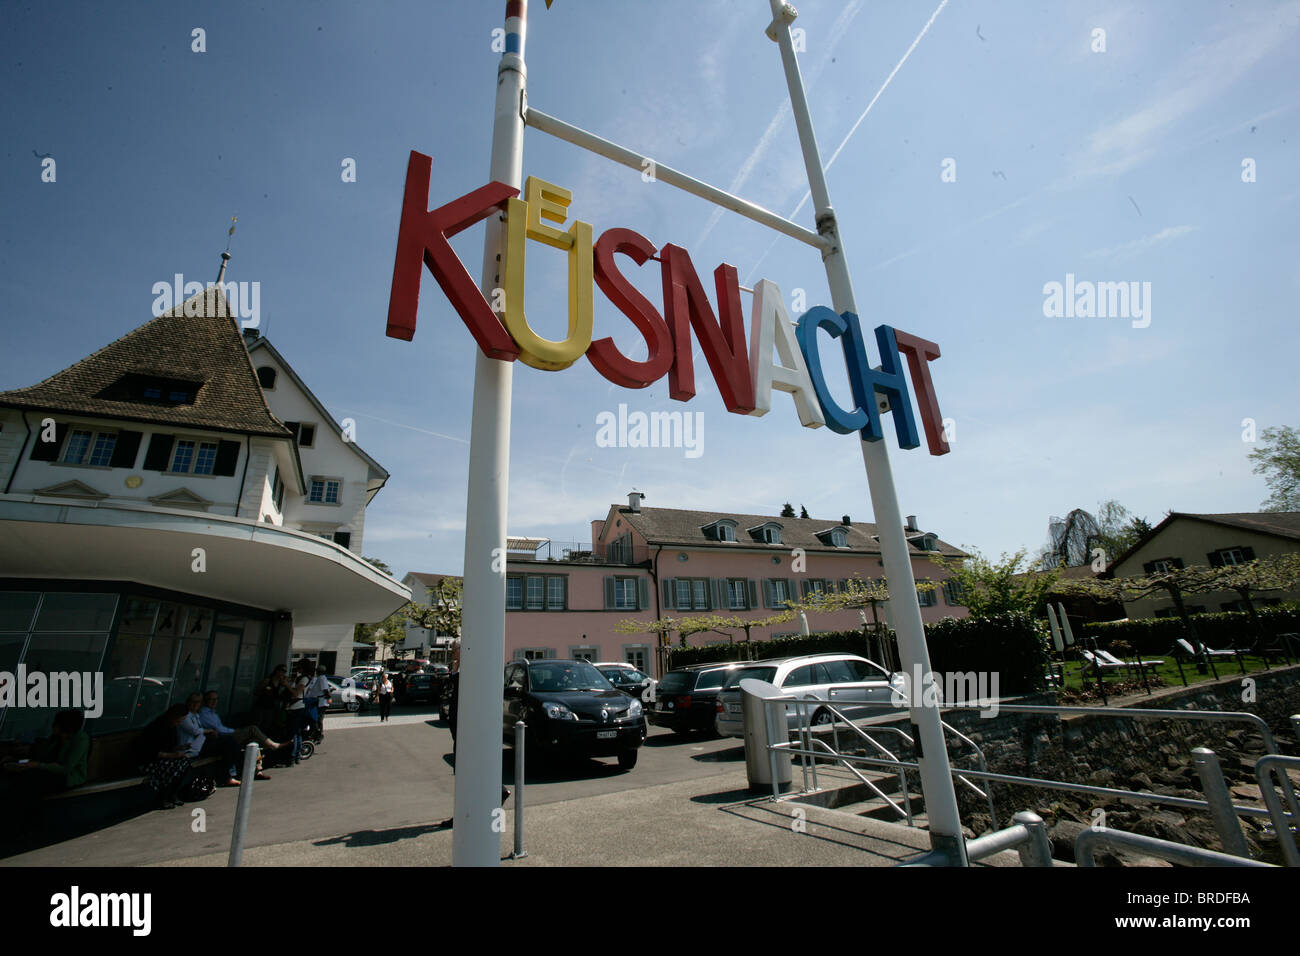 Kusnacht, a municipality in the district of Meilen, in the canton of Zurich, Switzerland, Europe. It stands on Lake Zurich. Stock Photo